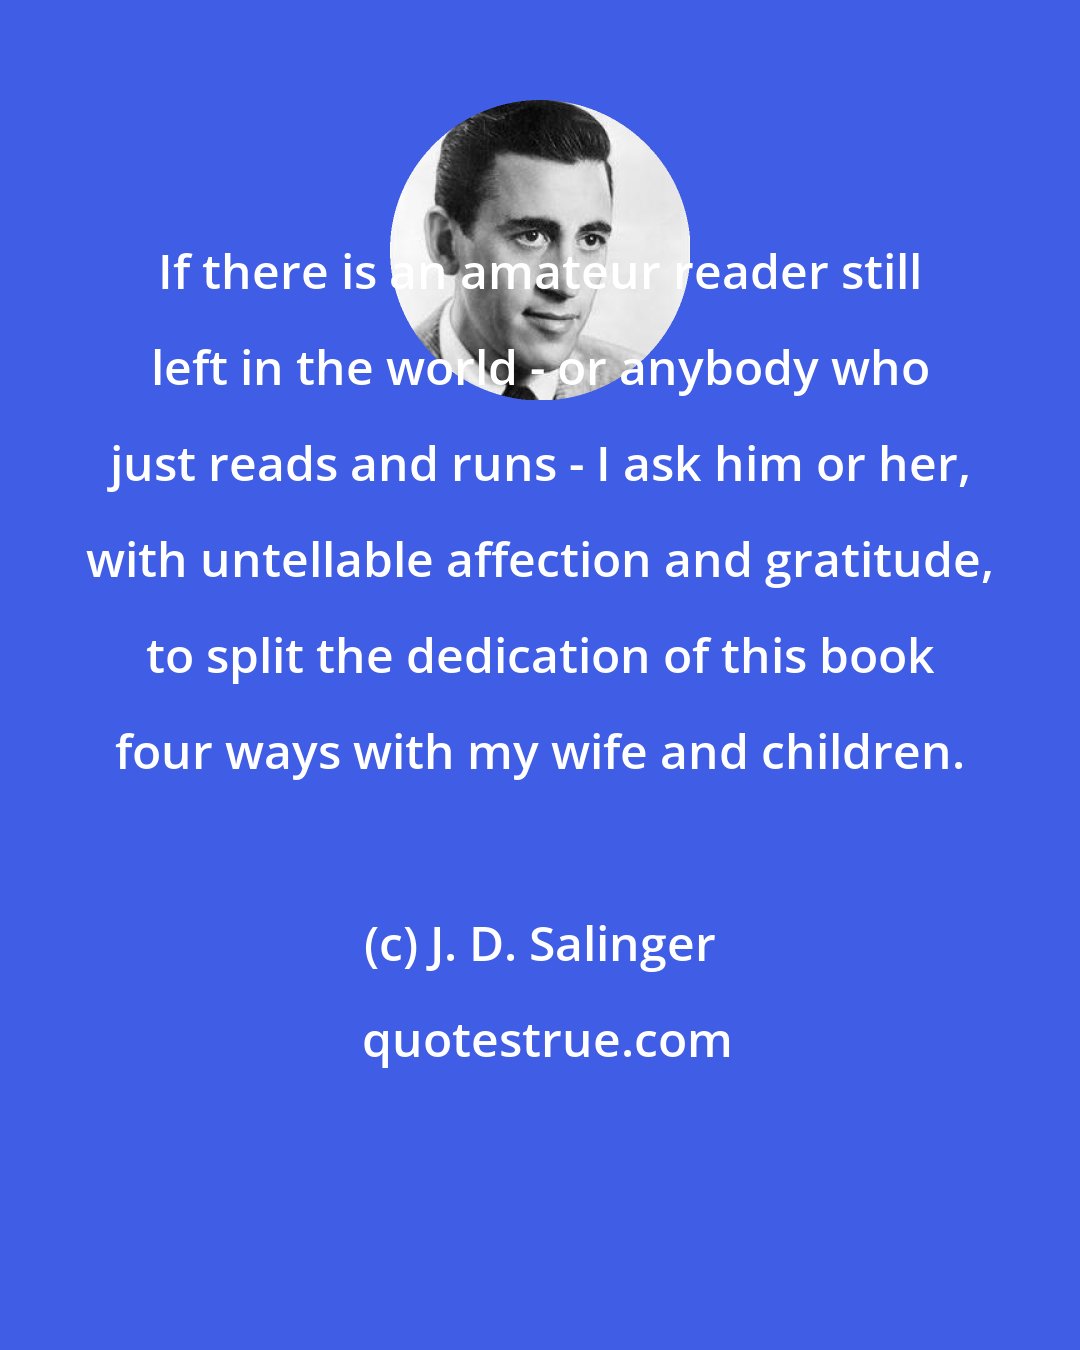 J. D. Salinger: If there is an amateur reader still left in the world - or anybody who just reads and runs - I ask him or her, with untellable affection and gratitude, to split the dedication of this book four ways with my wife and children.